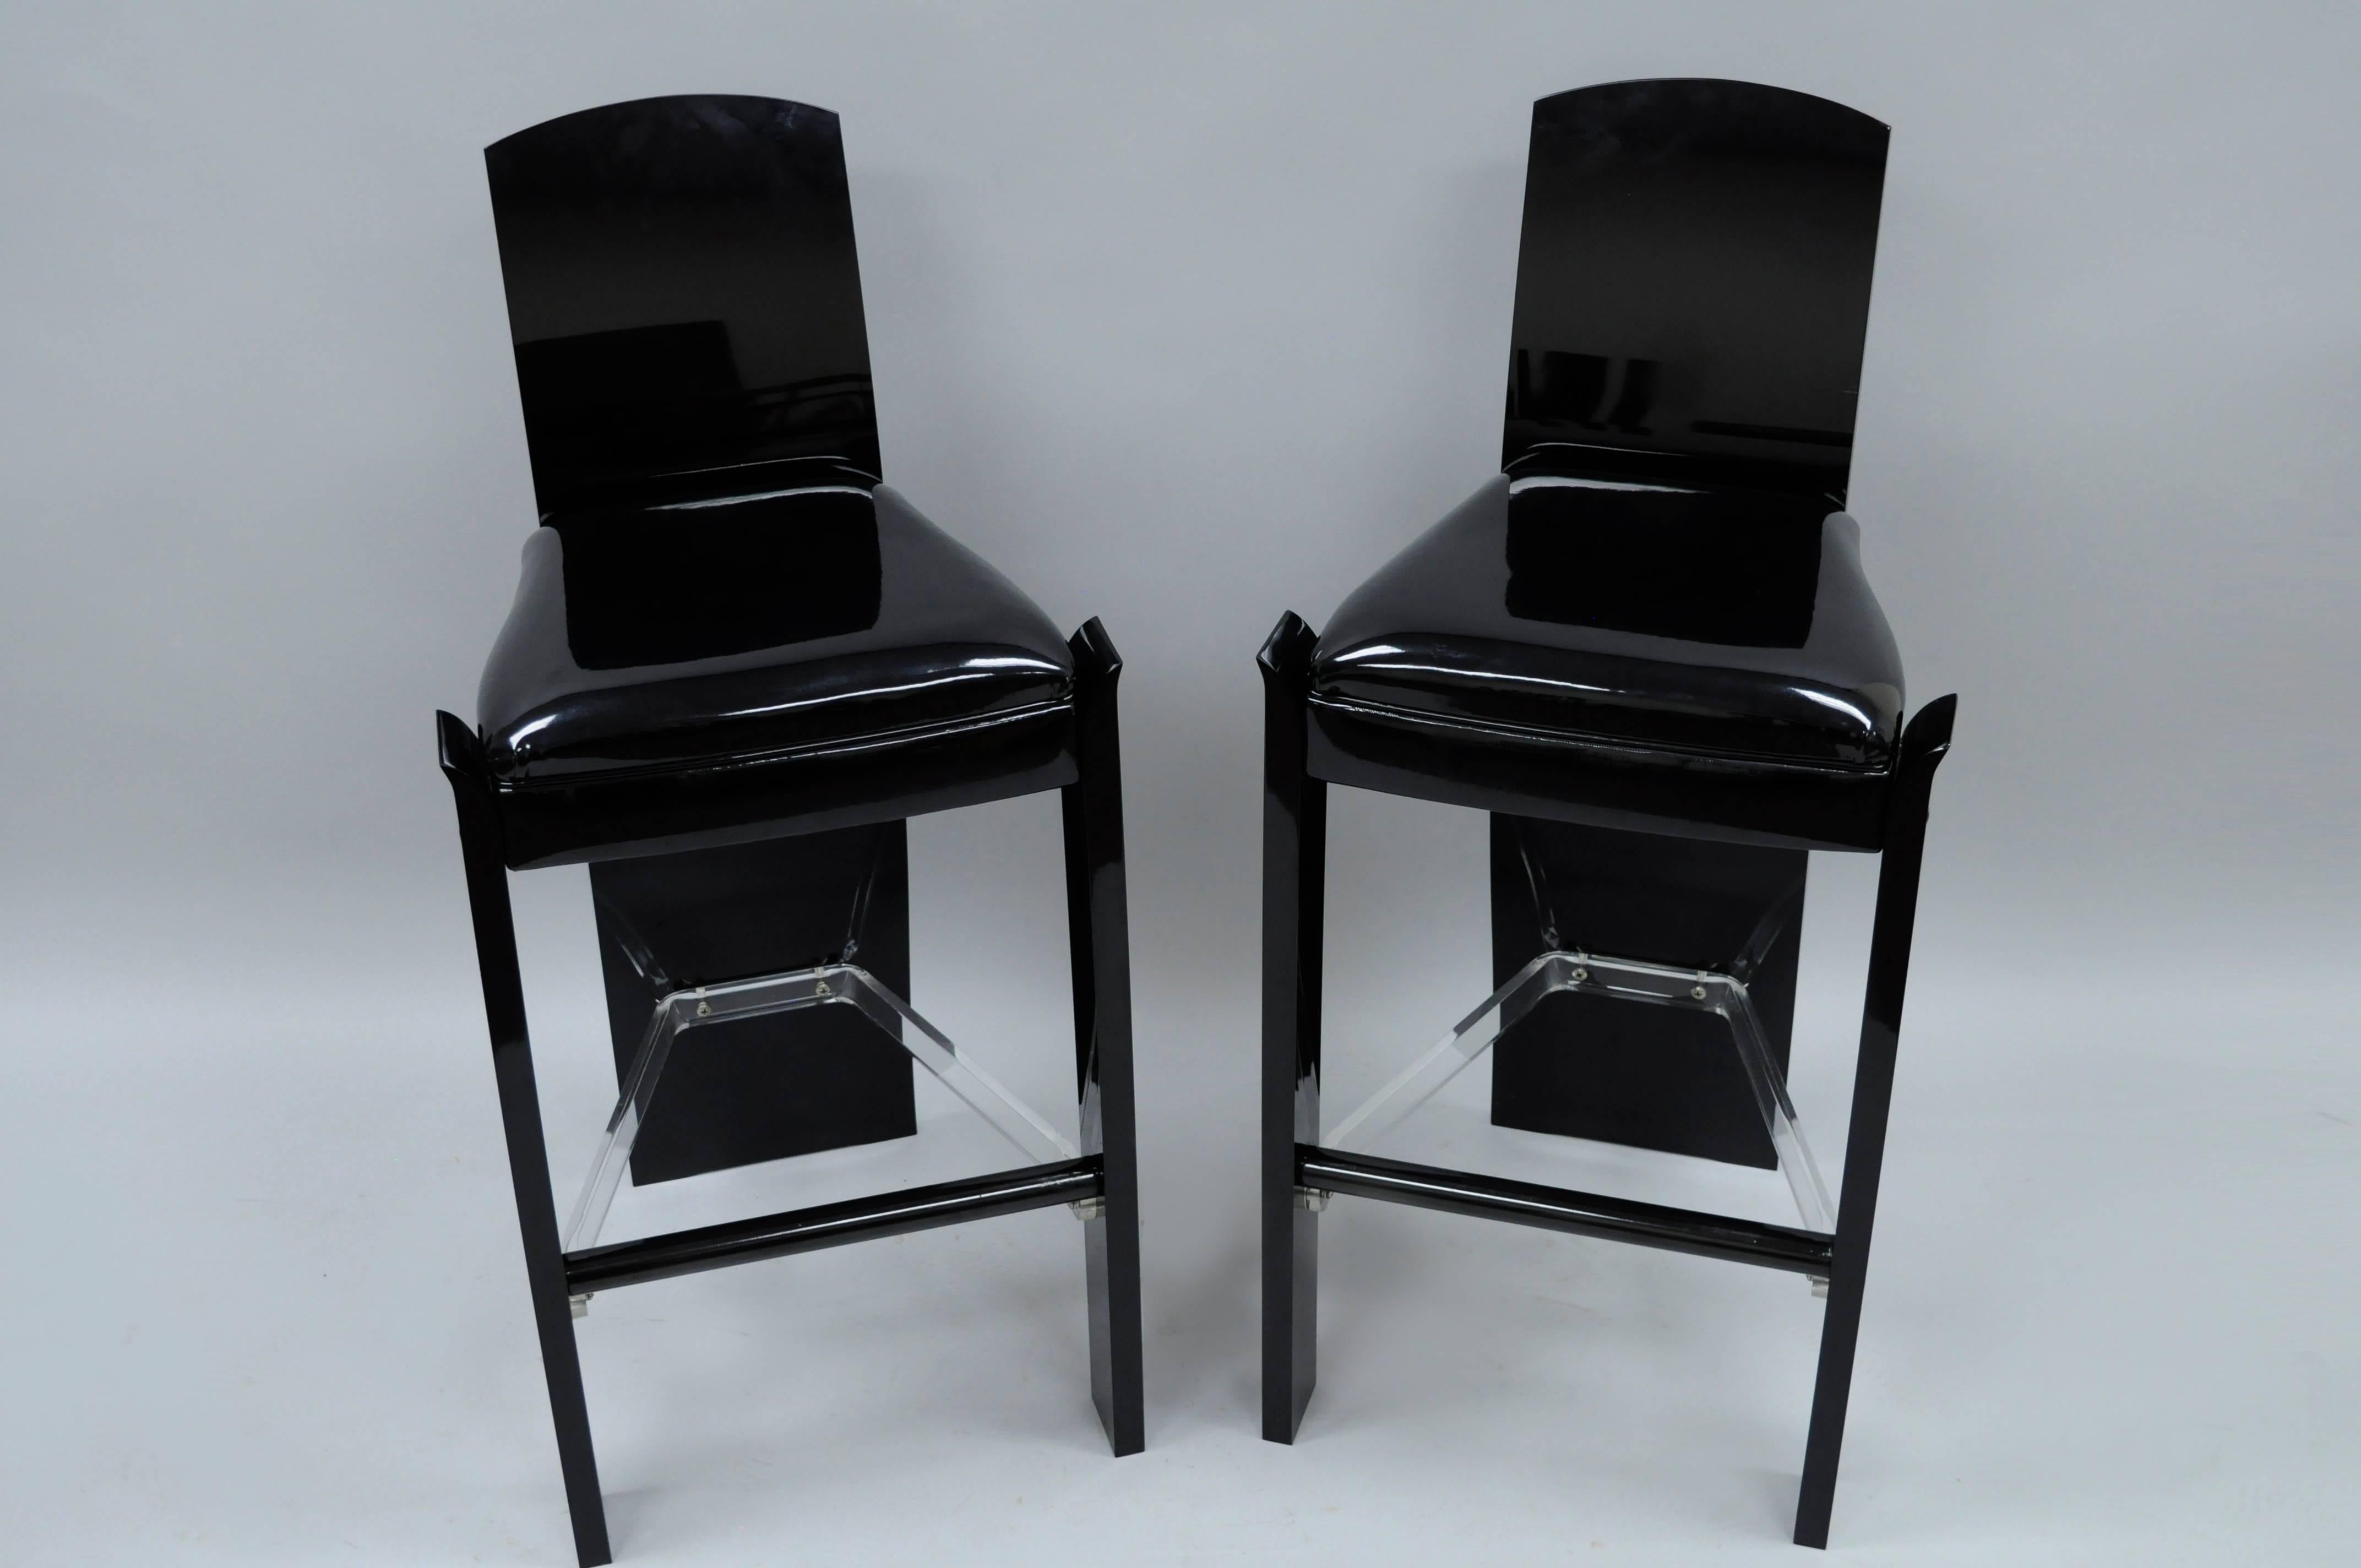 Pair of Black Lucite Hill Mfg. Mid Century Modern Curved Sculptural Bar Stools In Good Condition For Sale In Philadelphia, PA